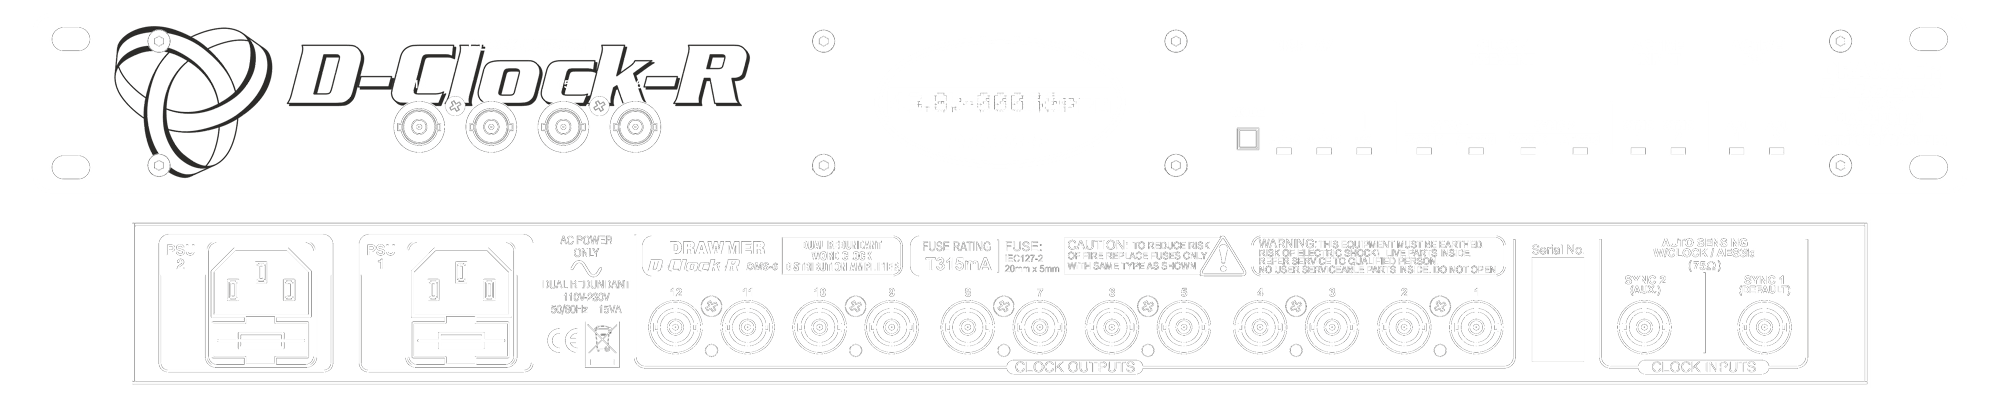 A line drawing of the front and rear panels of the D-Clock-R showing controls and connectors